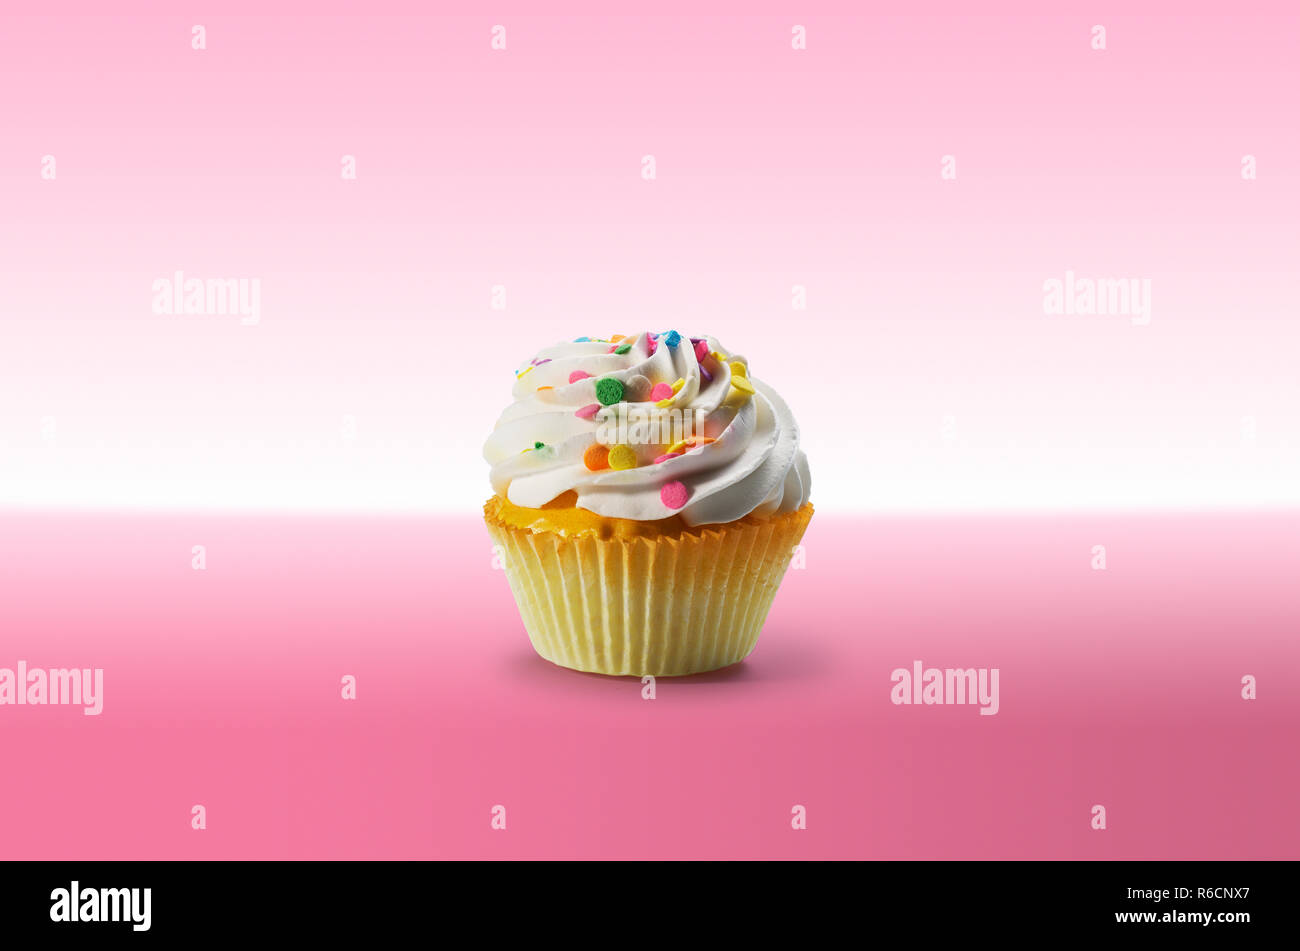 Cupcake with frosting and colourful sweets on a pink surface Stock Photo